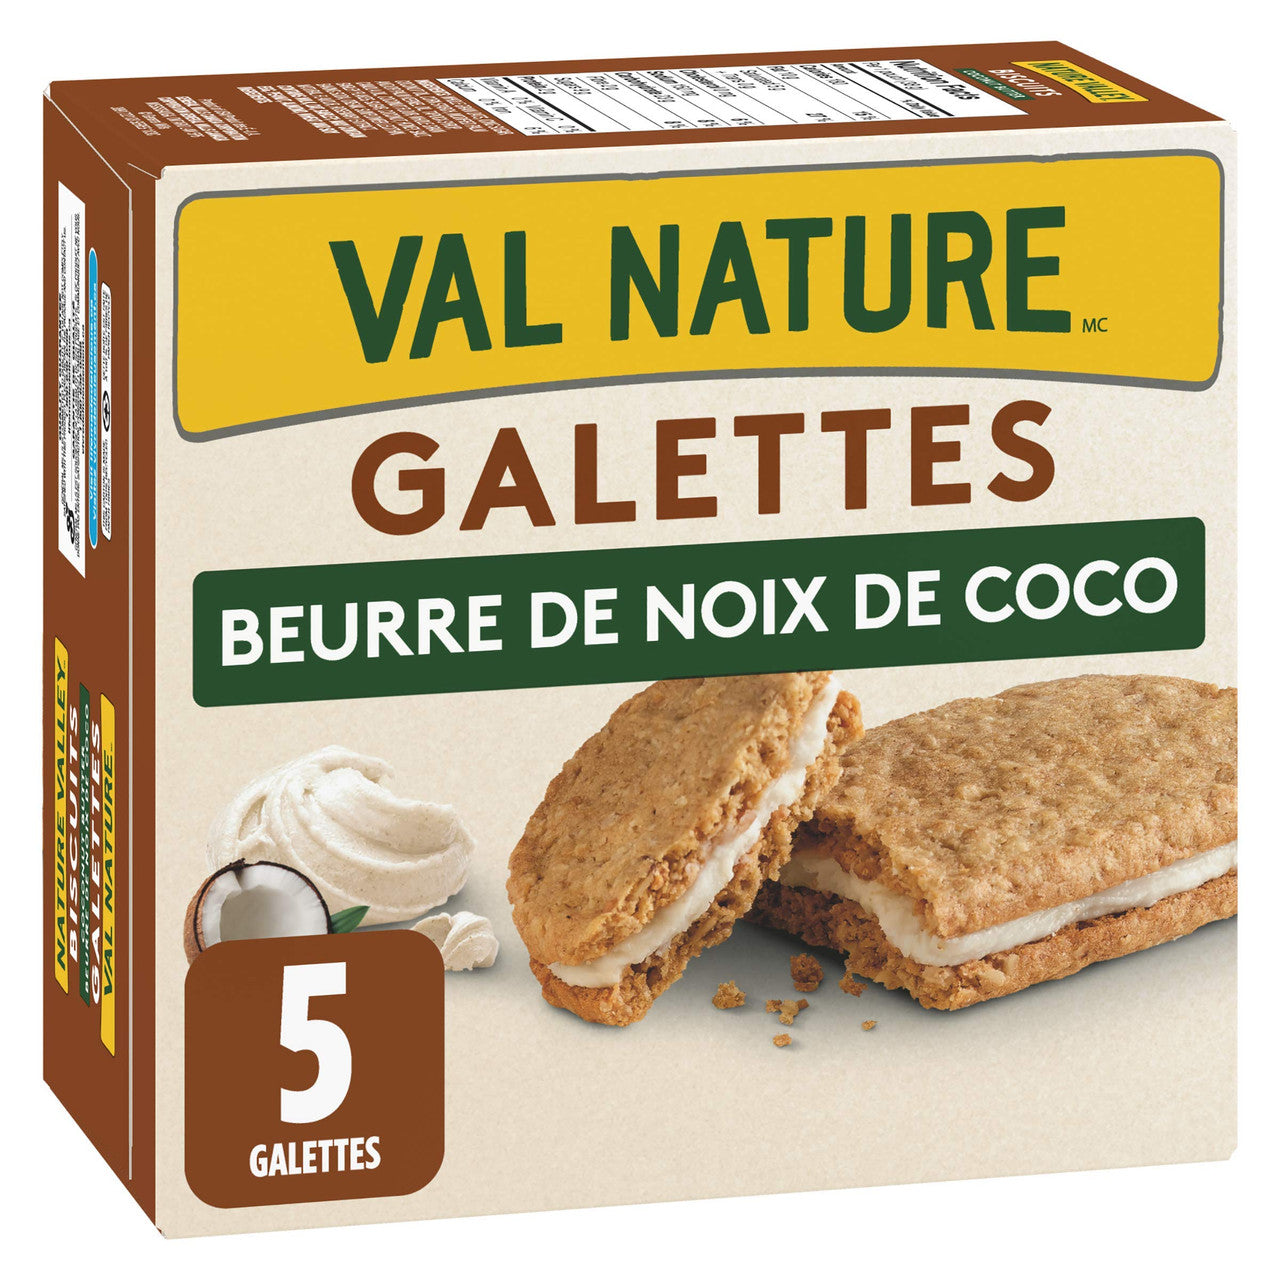 NATURE VALLEY Biscuit Coconut Butter, 5 Count, 190g/7.8oz, Box, {Imported from Canada}